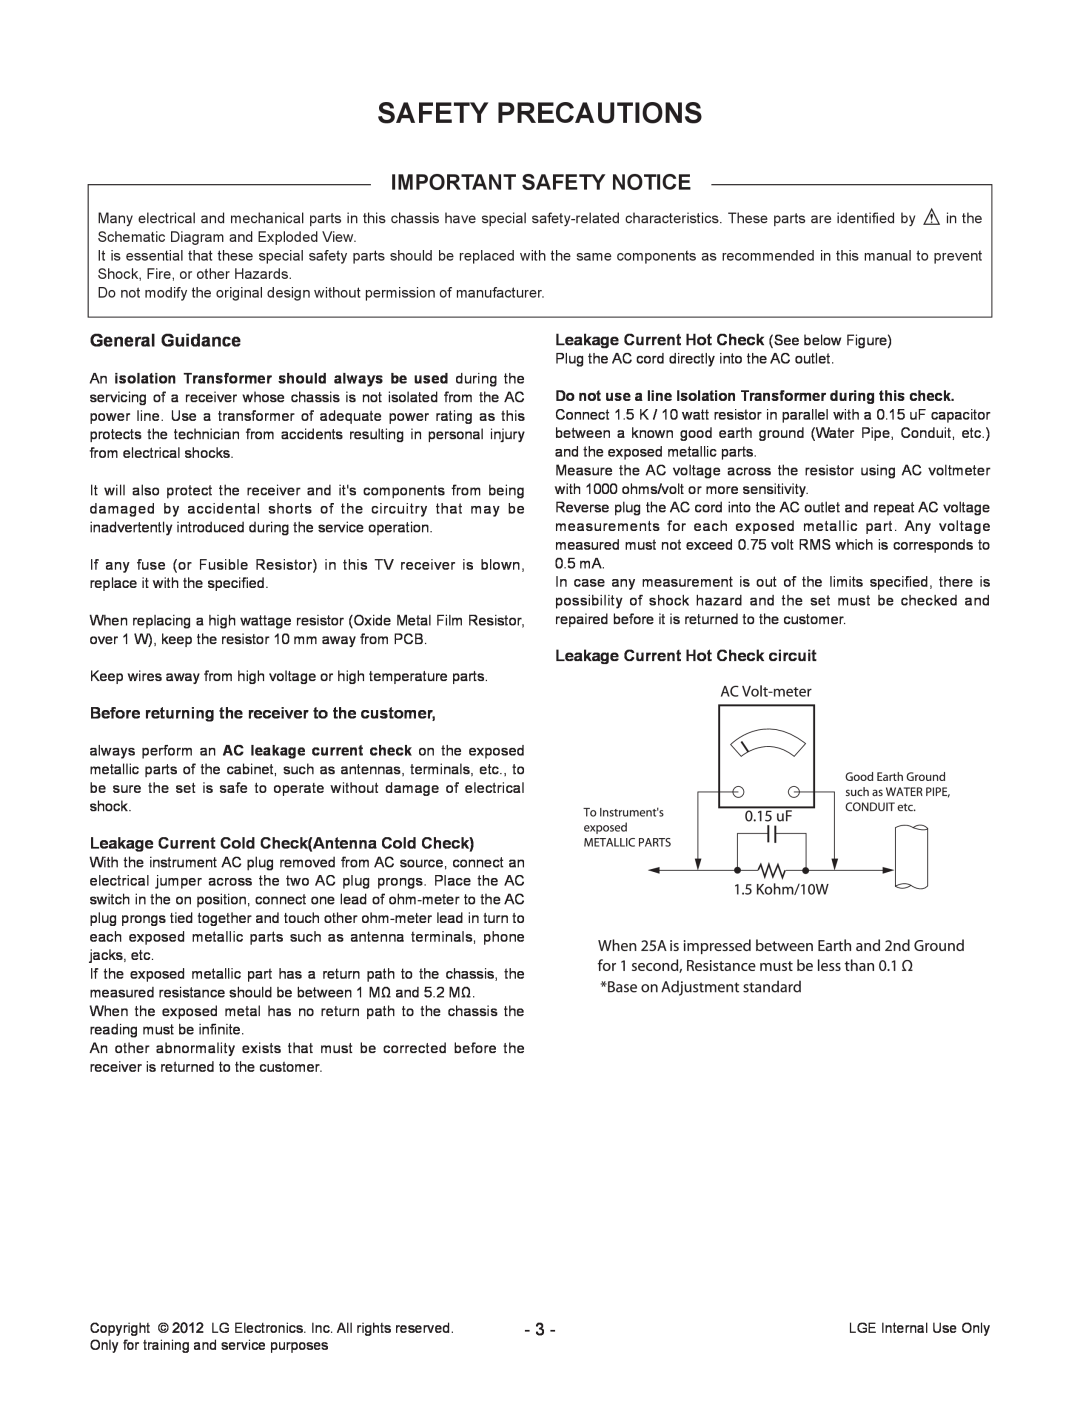 LG Electronics 640T-ZA Safety Precautions, Important Safety Notice, Before returning the receiver to the customer 